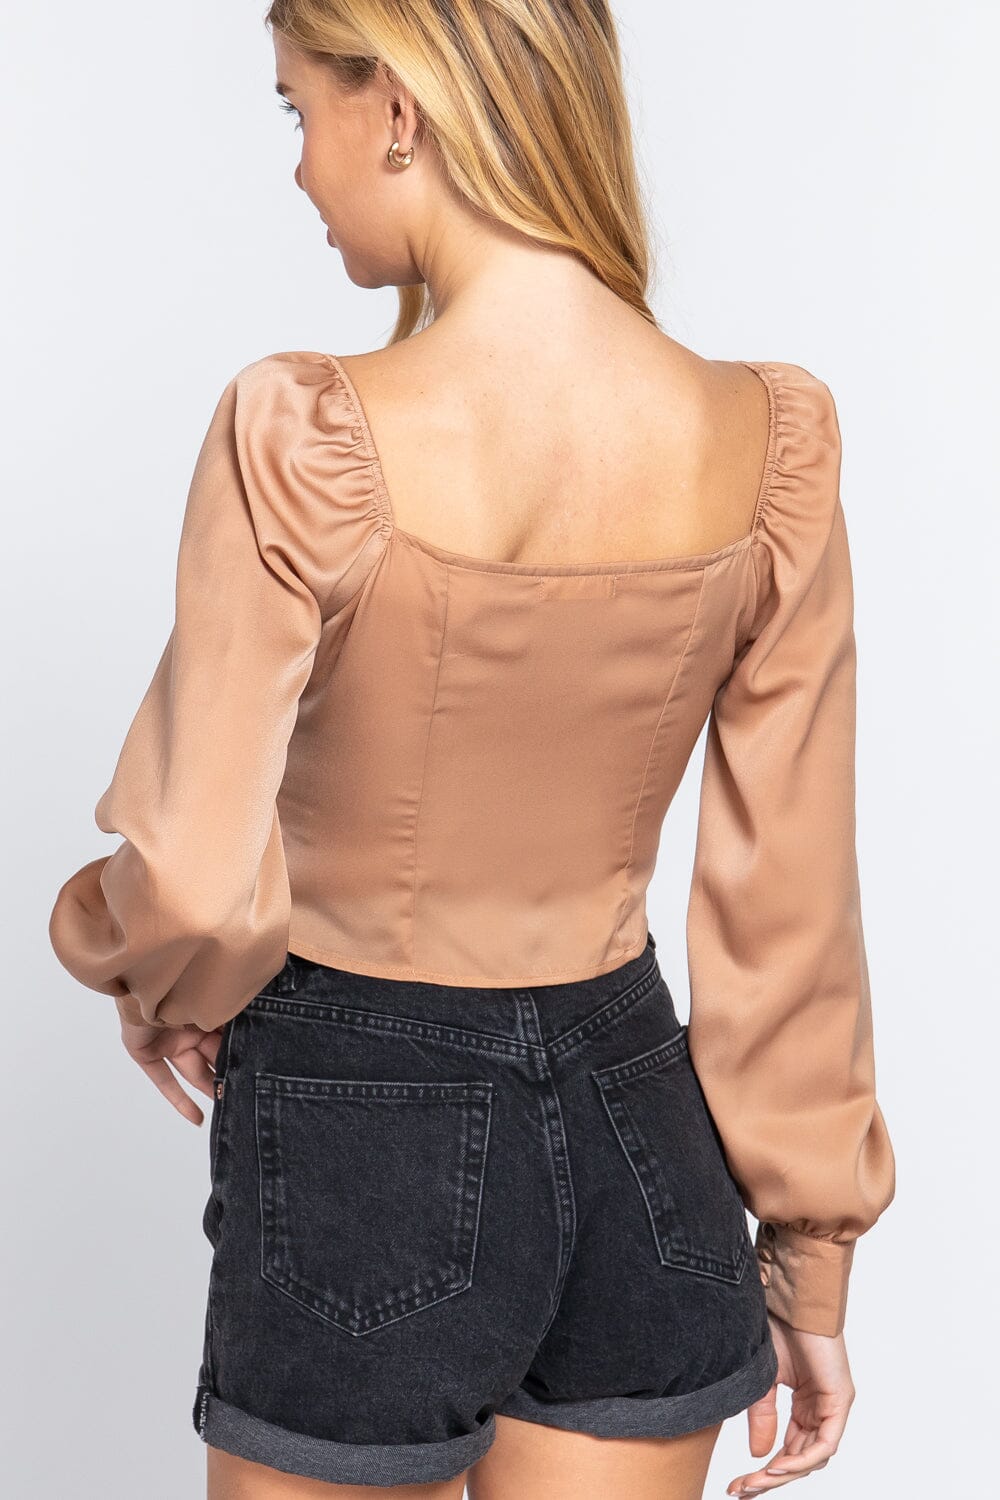 Champagne Light Brown Long Sleeve Sweetheart Neck Front Ribbon Tie Woven Top_ Shirts & Tops jehouze 